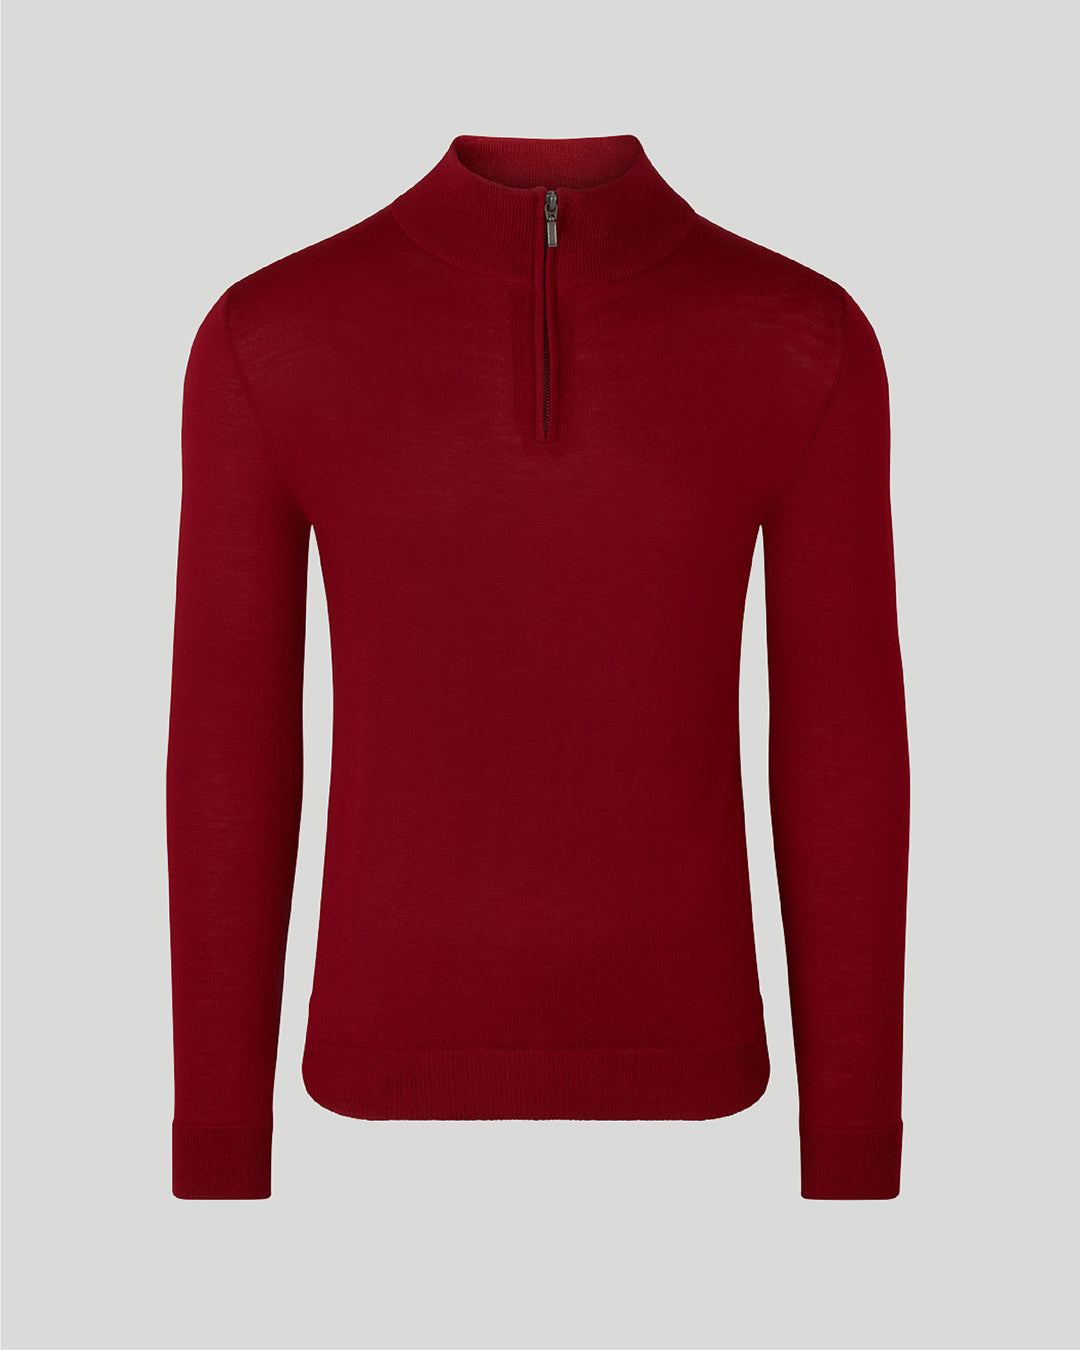 Image of our merino wool 1/4 zip jumper in maroon red for men are made from a lightweight fabric and reactive natural fibre.